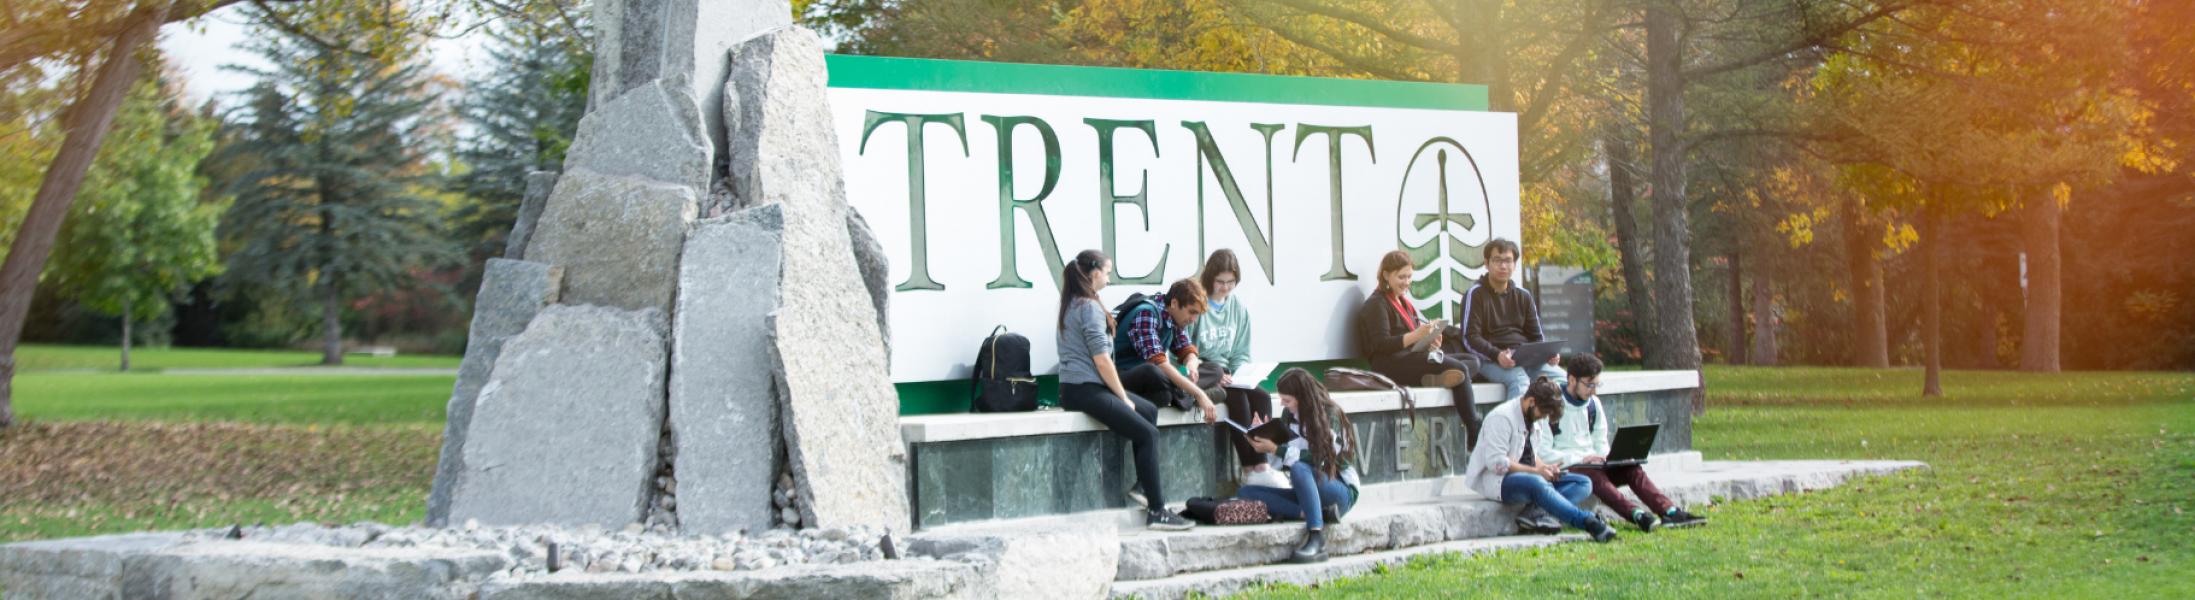 students on trent sign